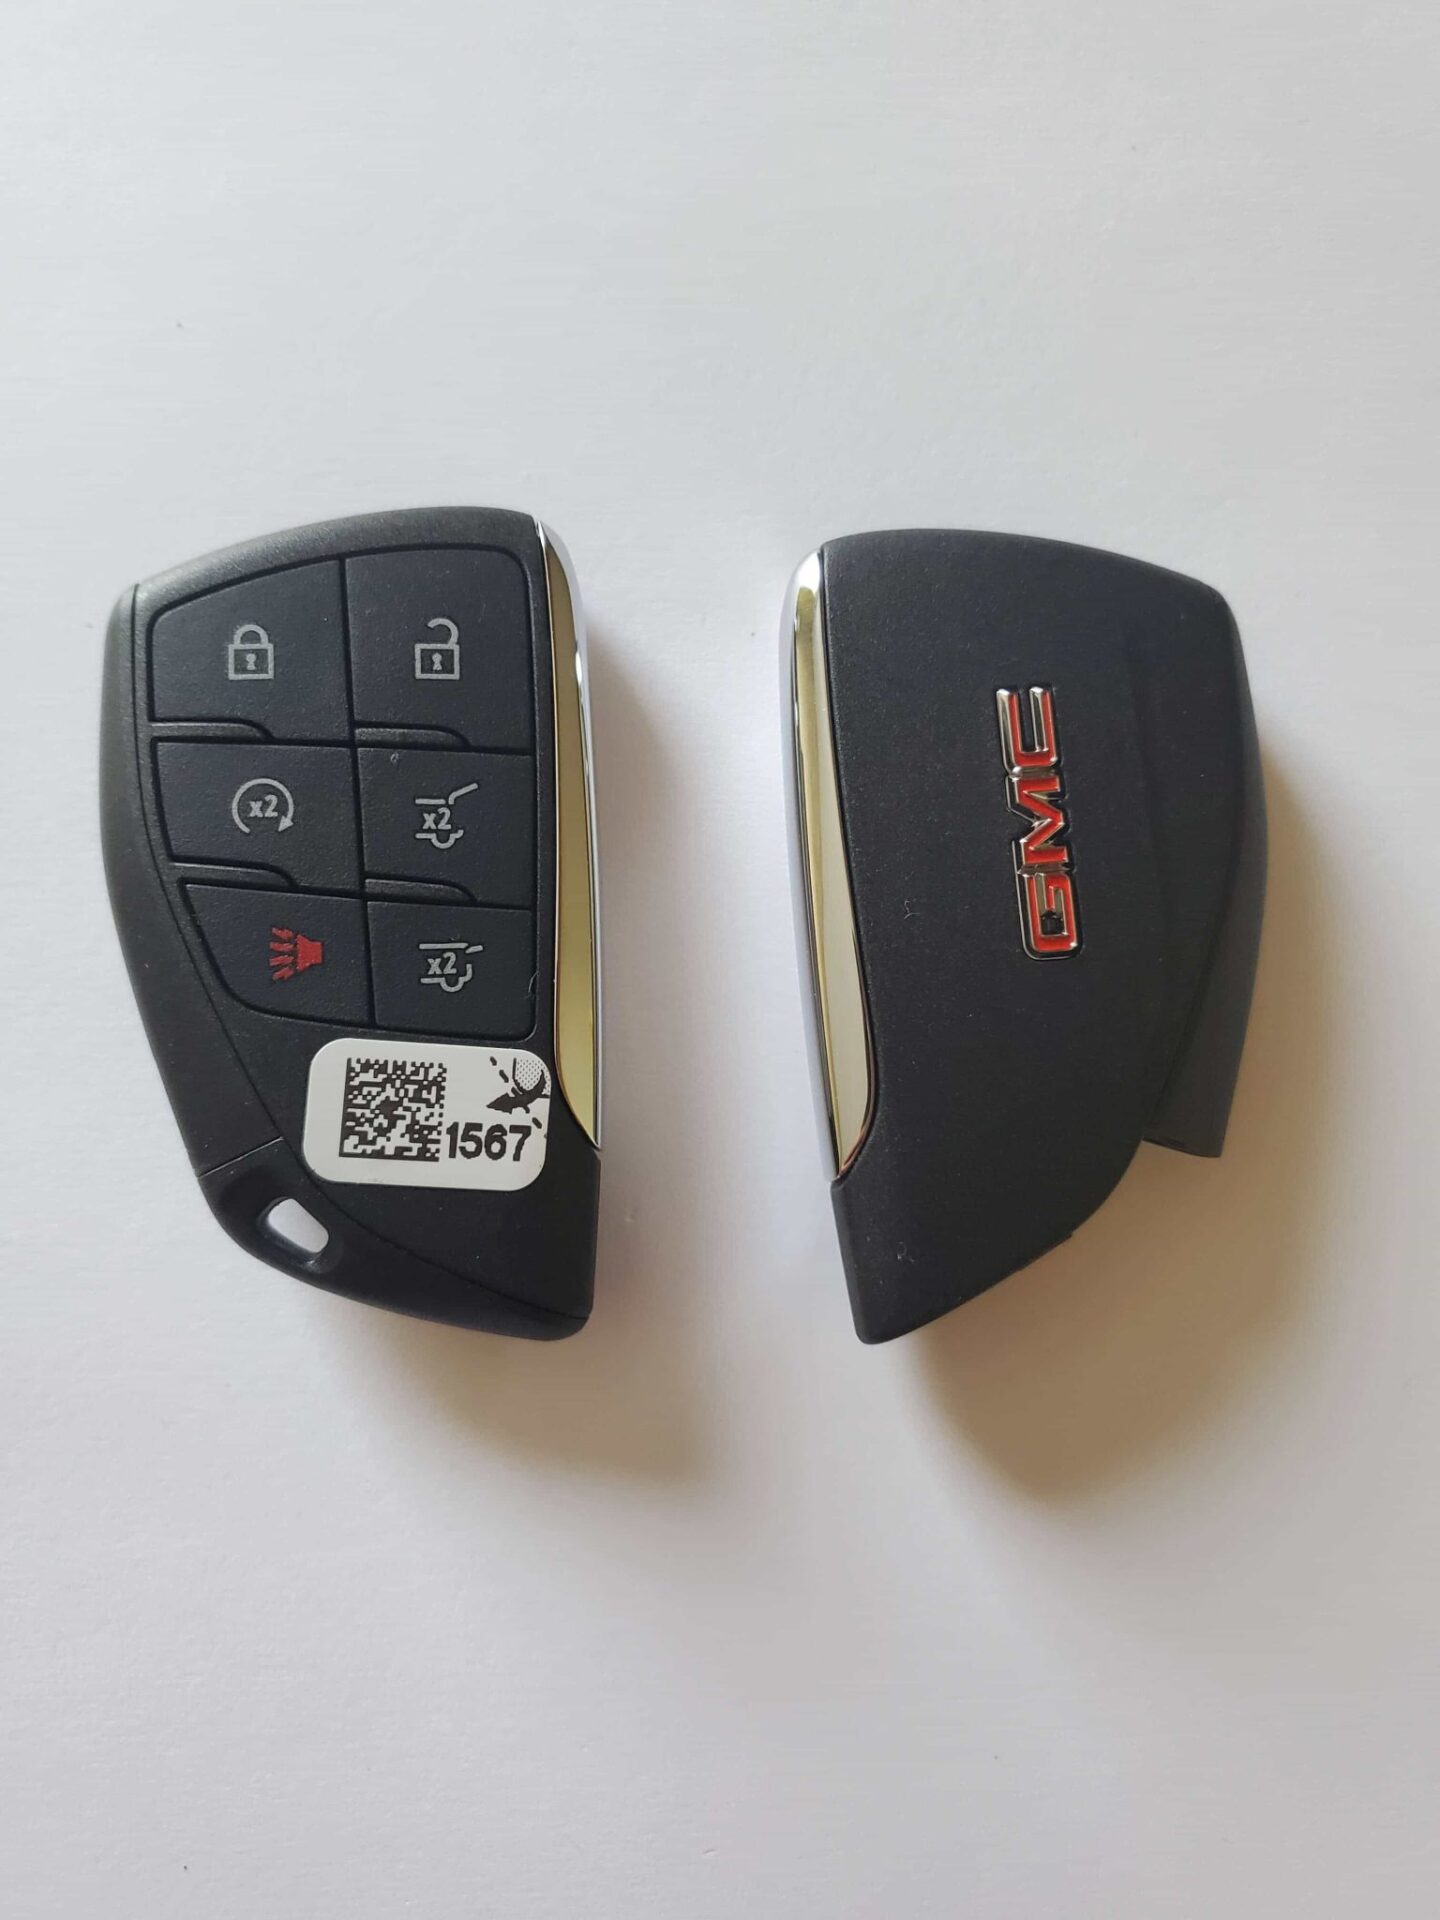 GMC Yukon Key Replacement What To Do, Options, Costs & More